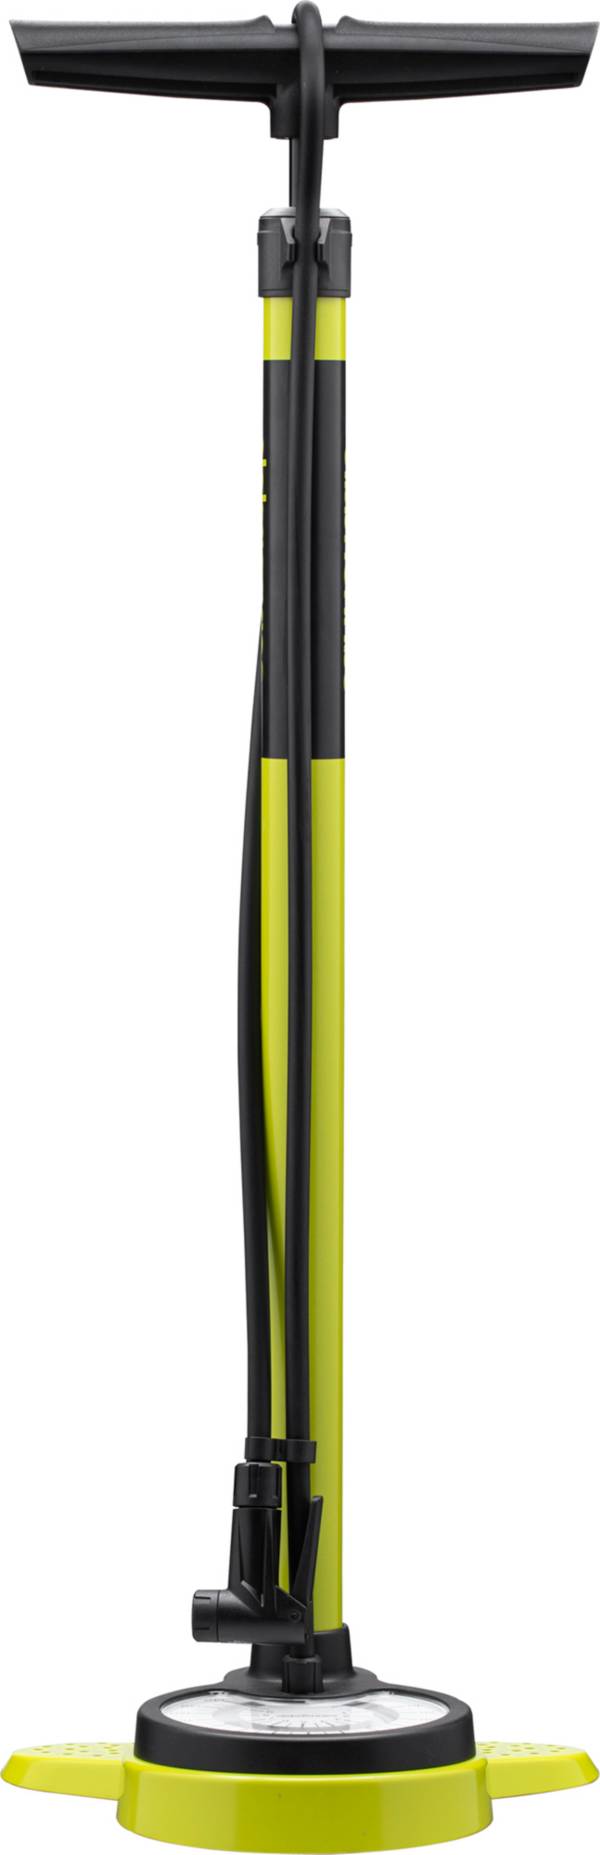 Cannondale Essential Floor Pump product image